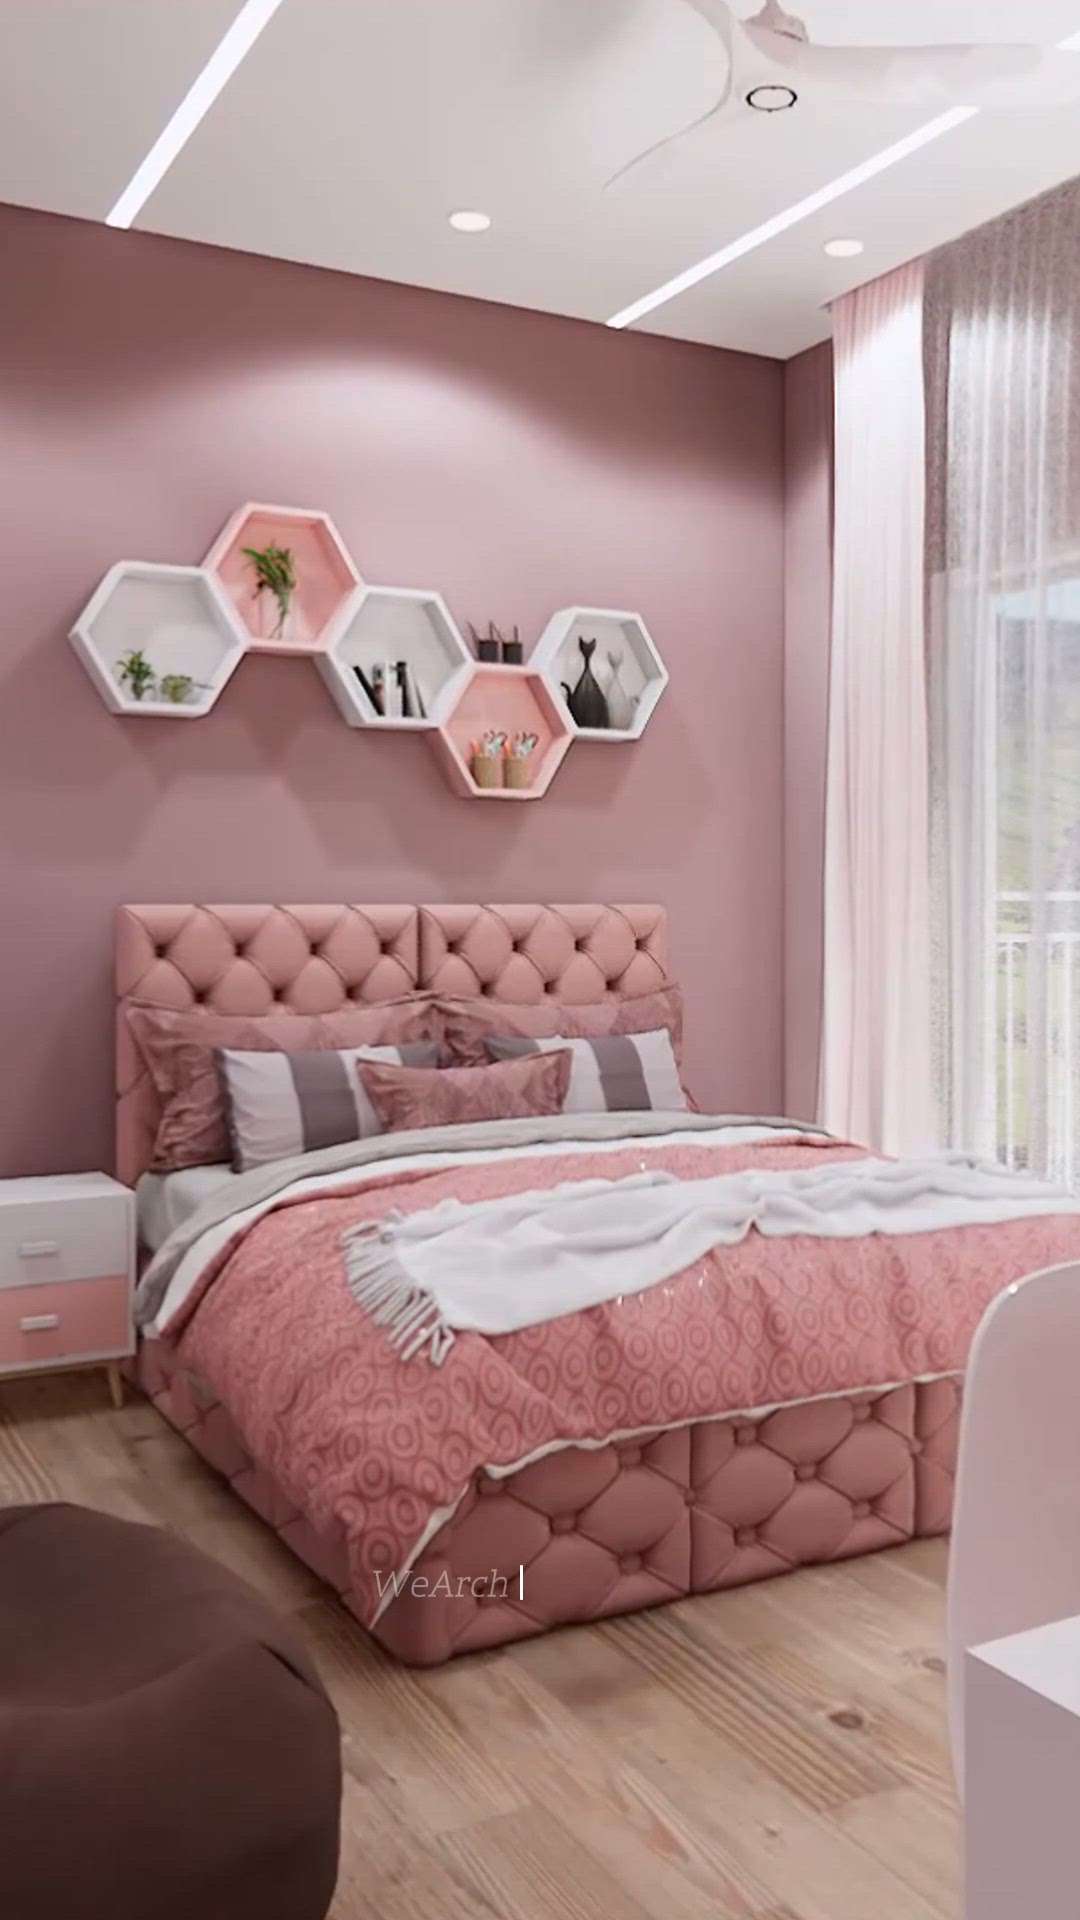 kids bedroom design....
.
.
.
For your complete architectural, renovation, interior requirements please contact 91 953 9999 885 
 #wearchdevelopers #architecturedesigns #InteriorDesigner #bedroomdesign  #KidsRoom